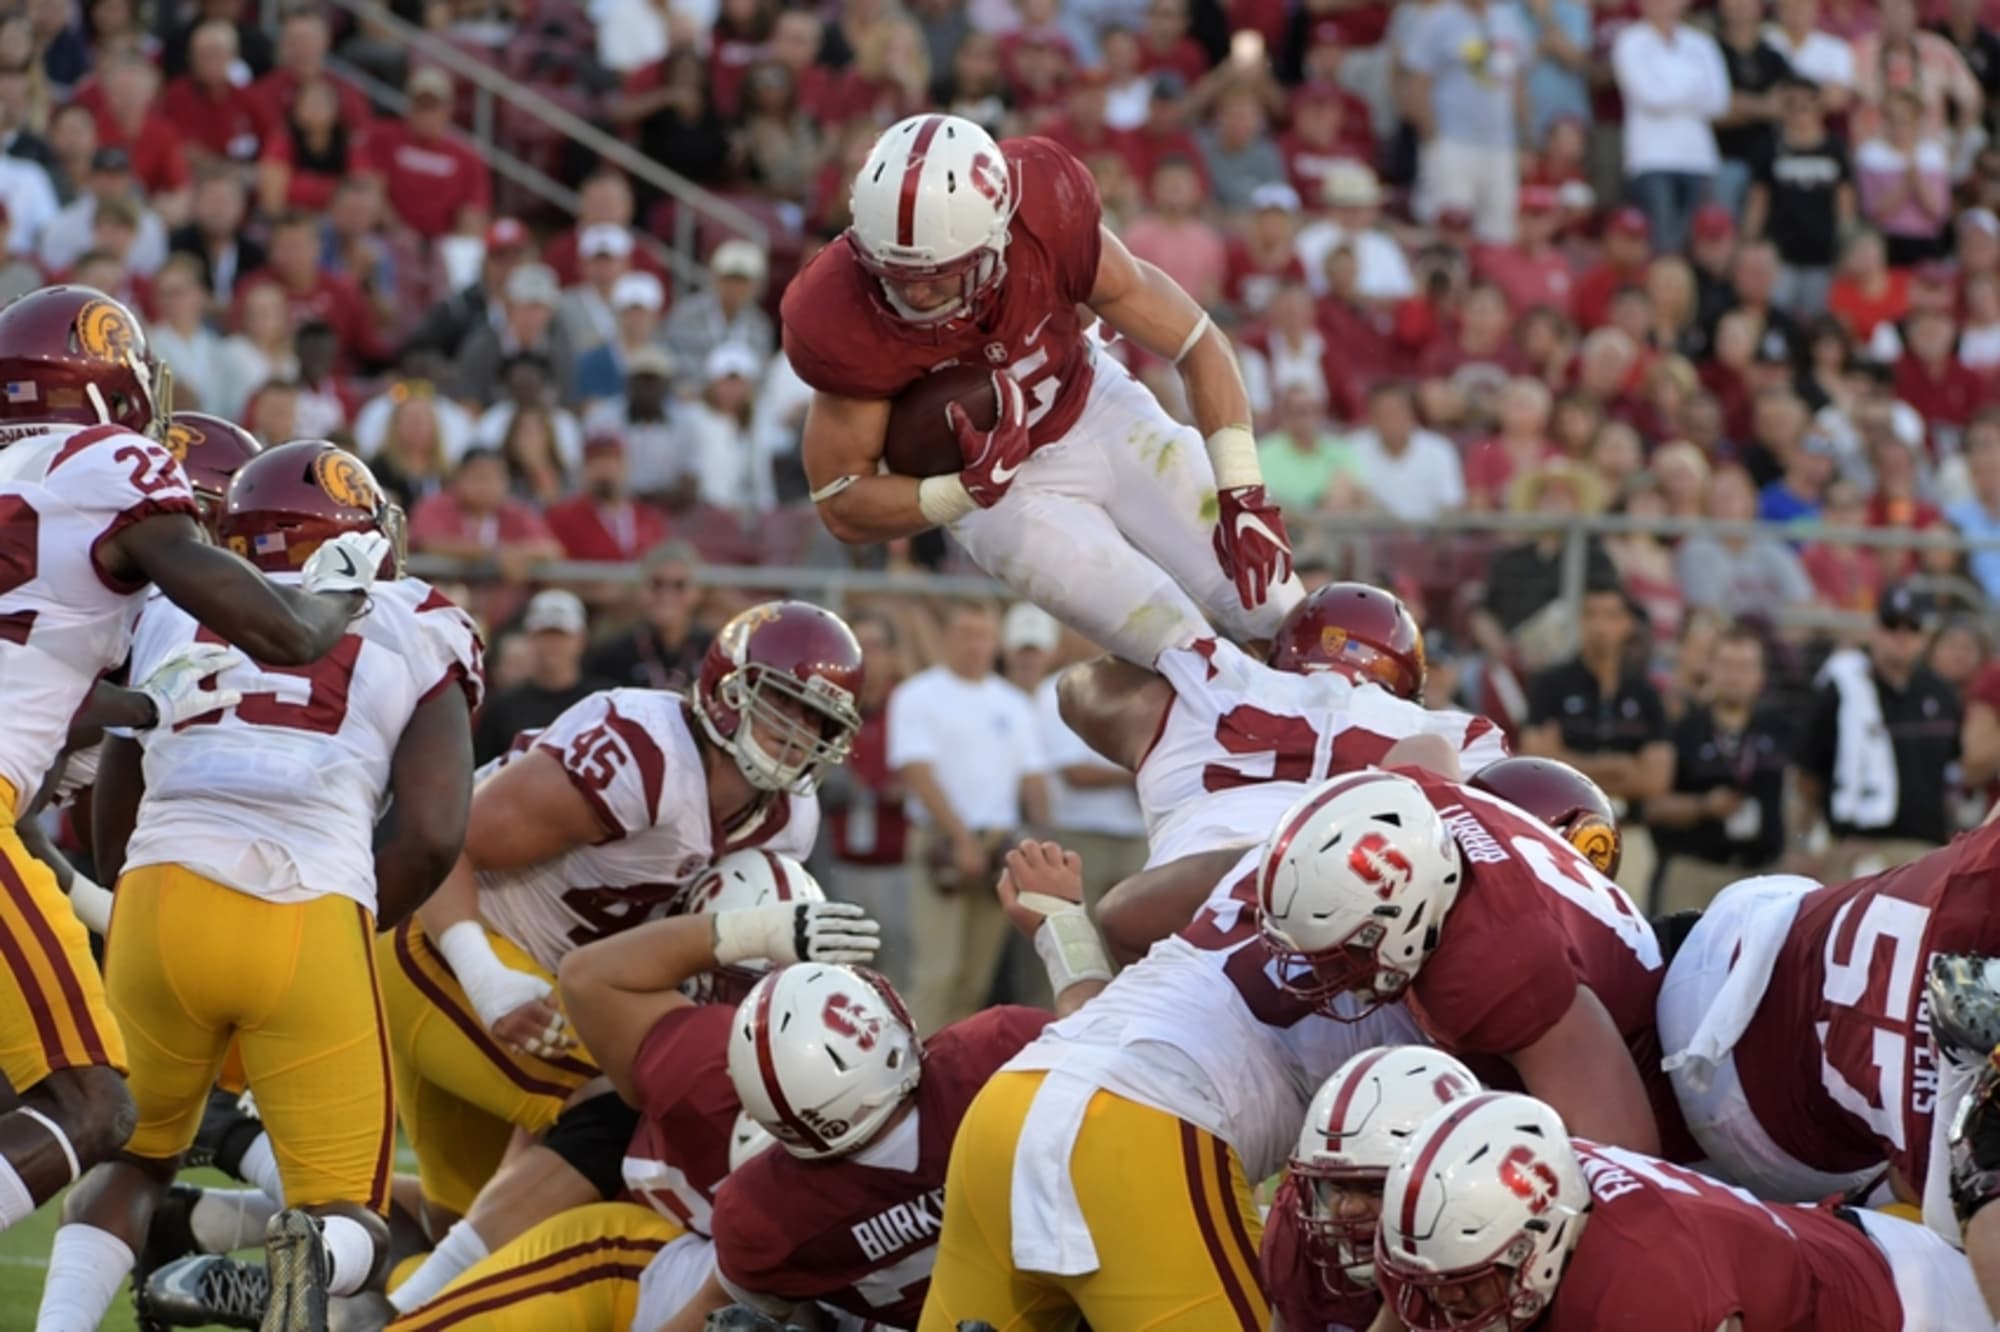 Stanford vs USC Highlights, score and recap